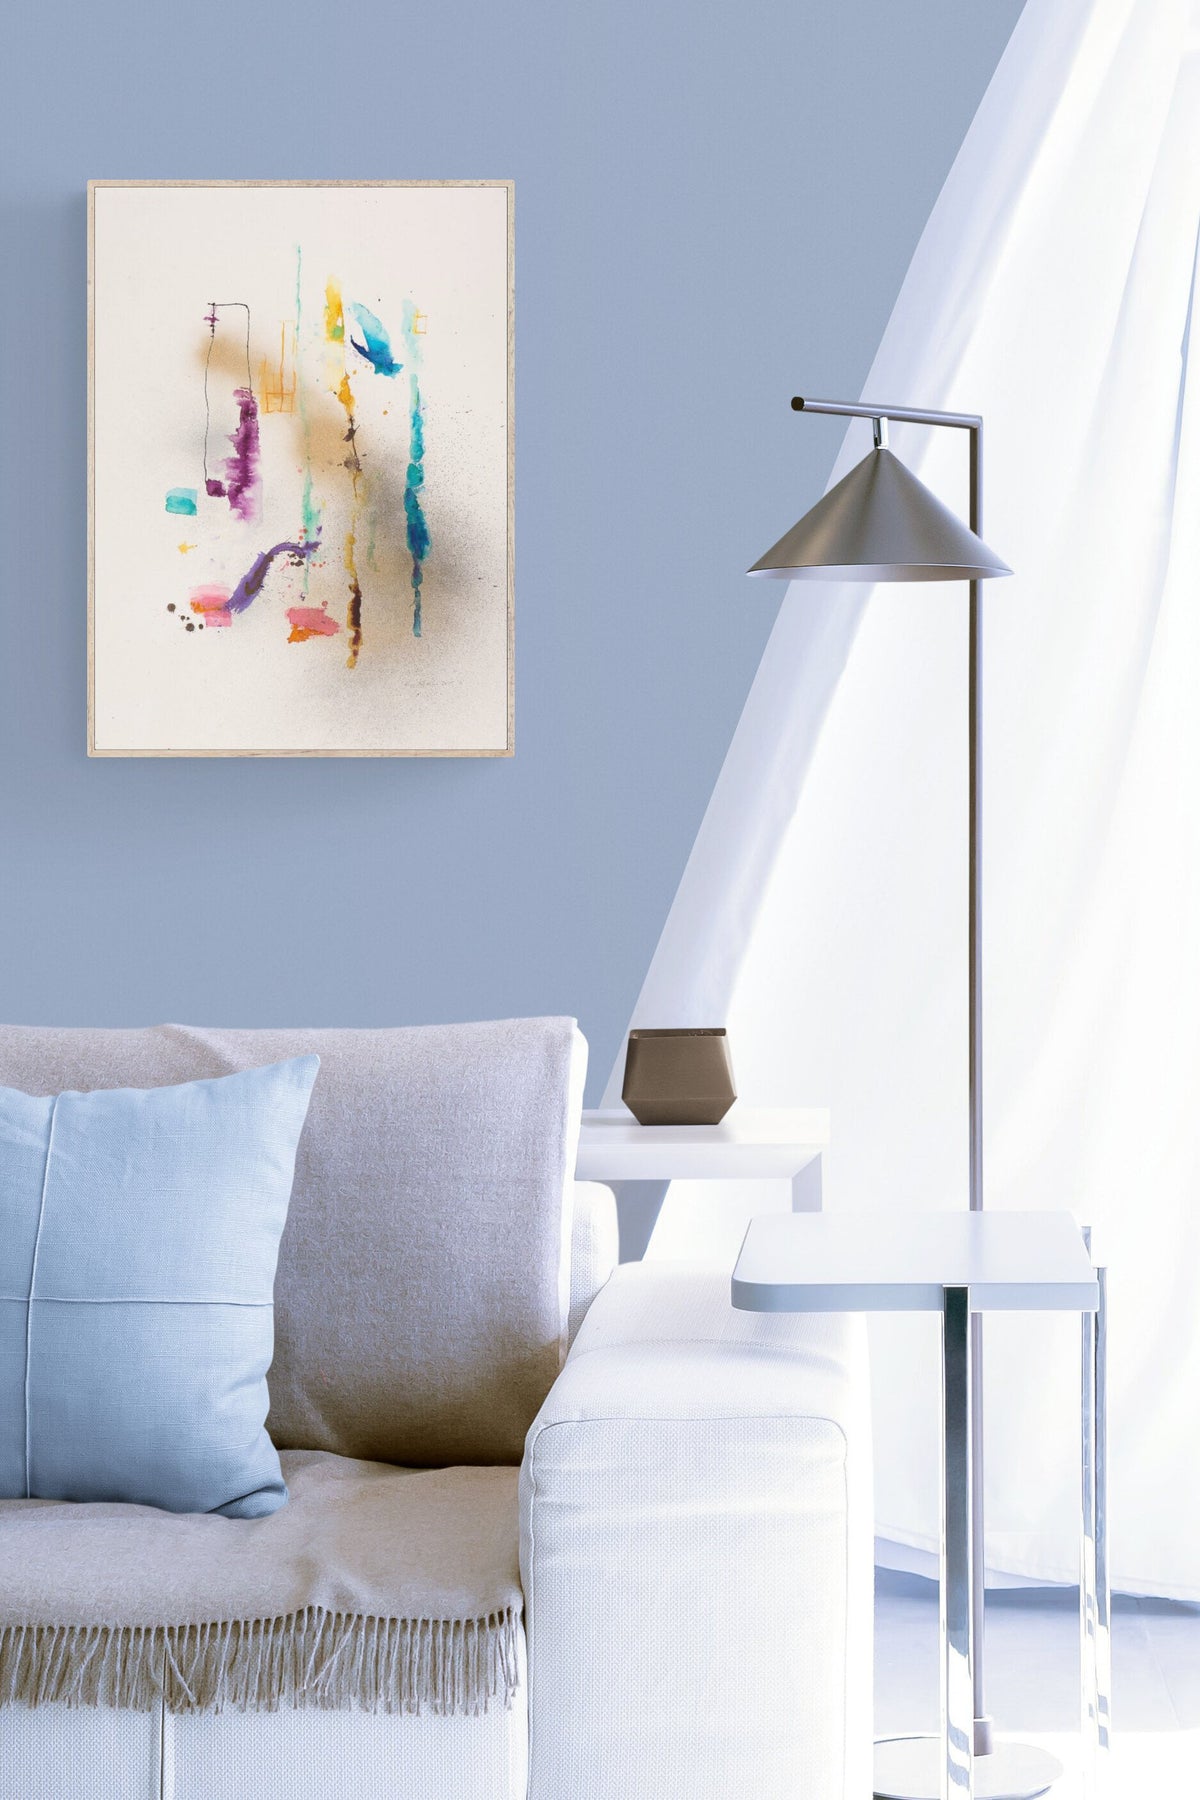 Expressionistic Painting adds color with lyrical rhythms of nature to this soft living room